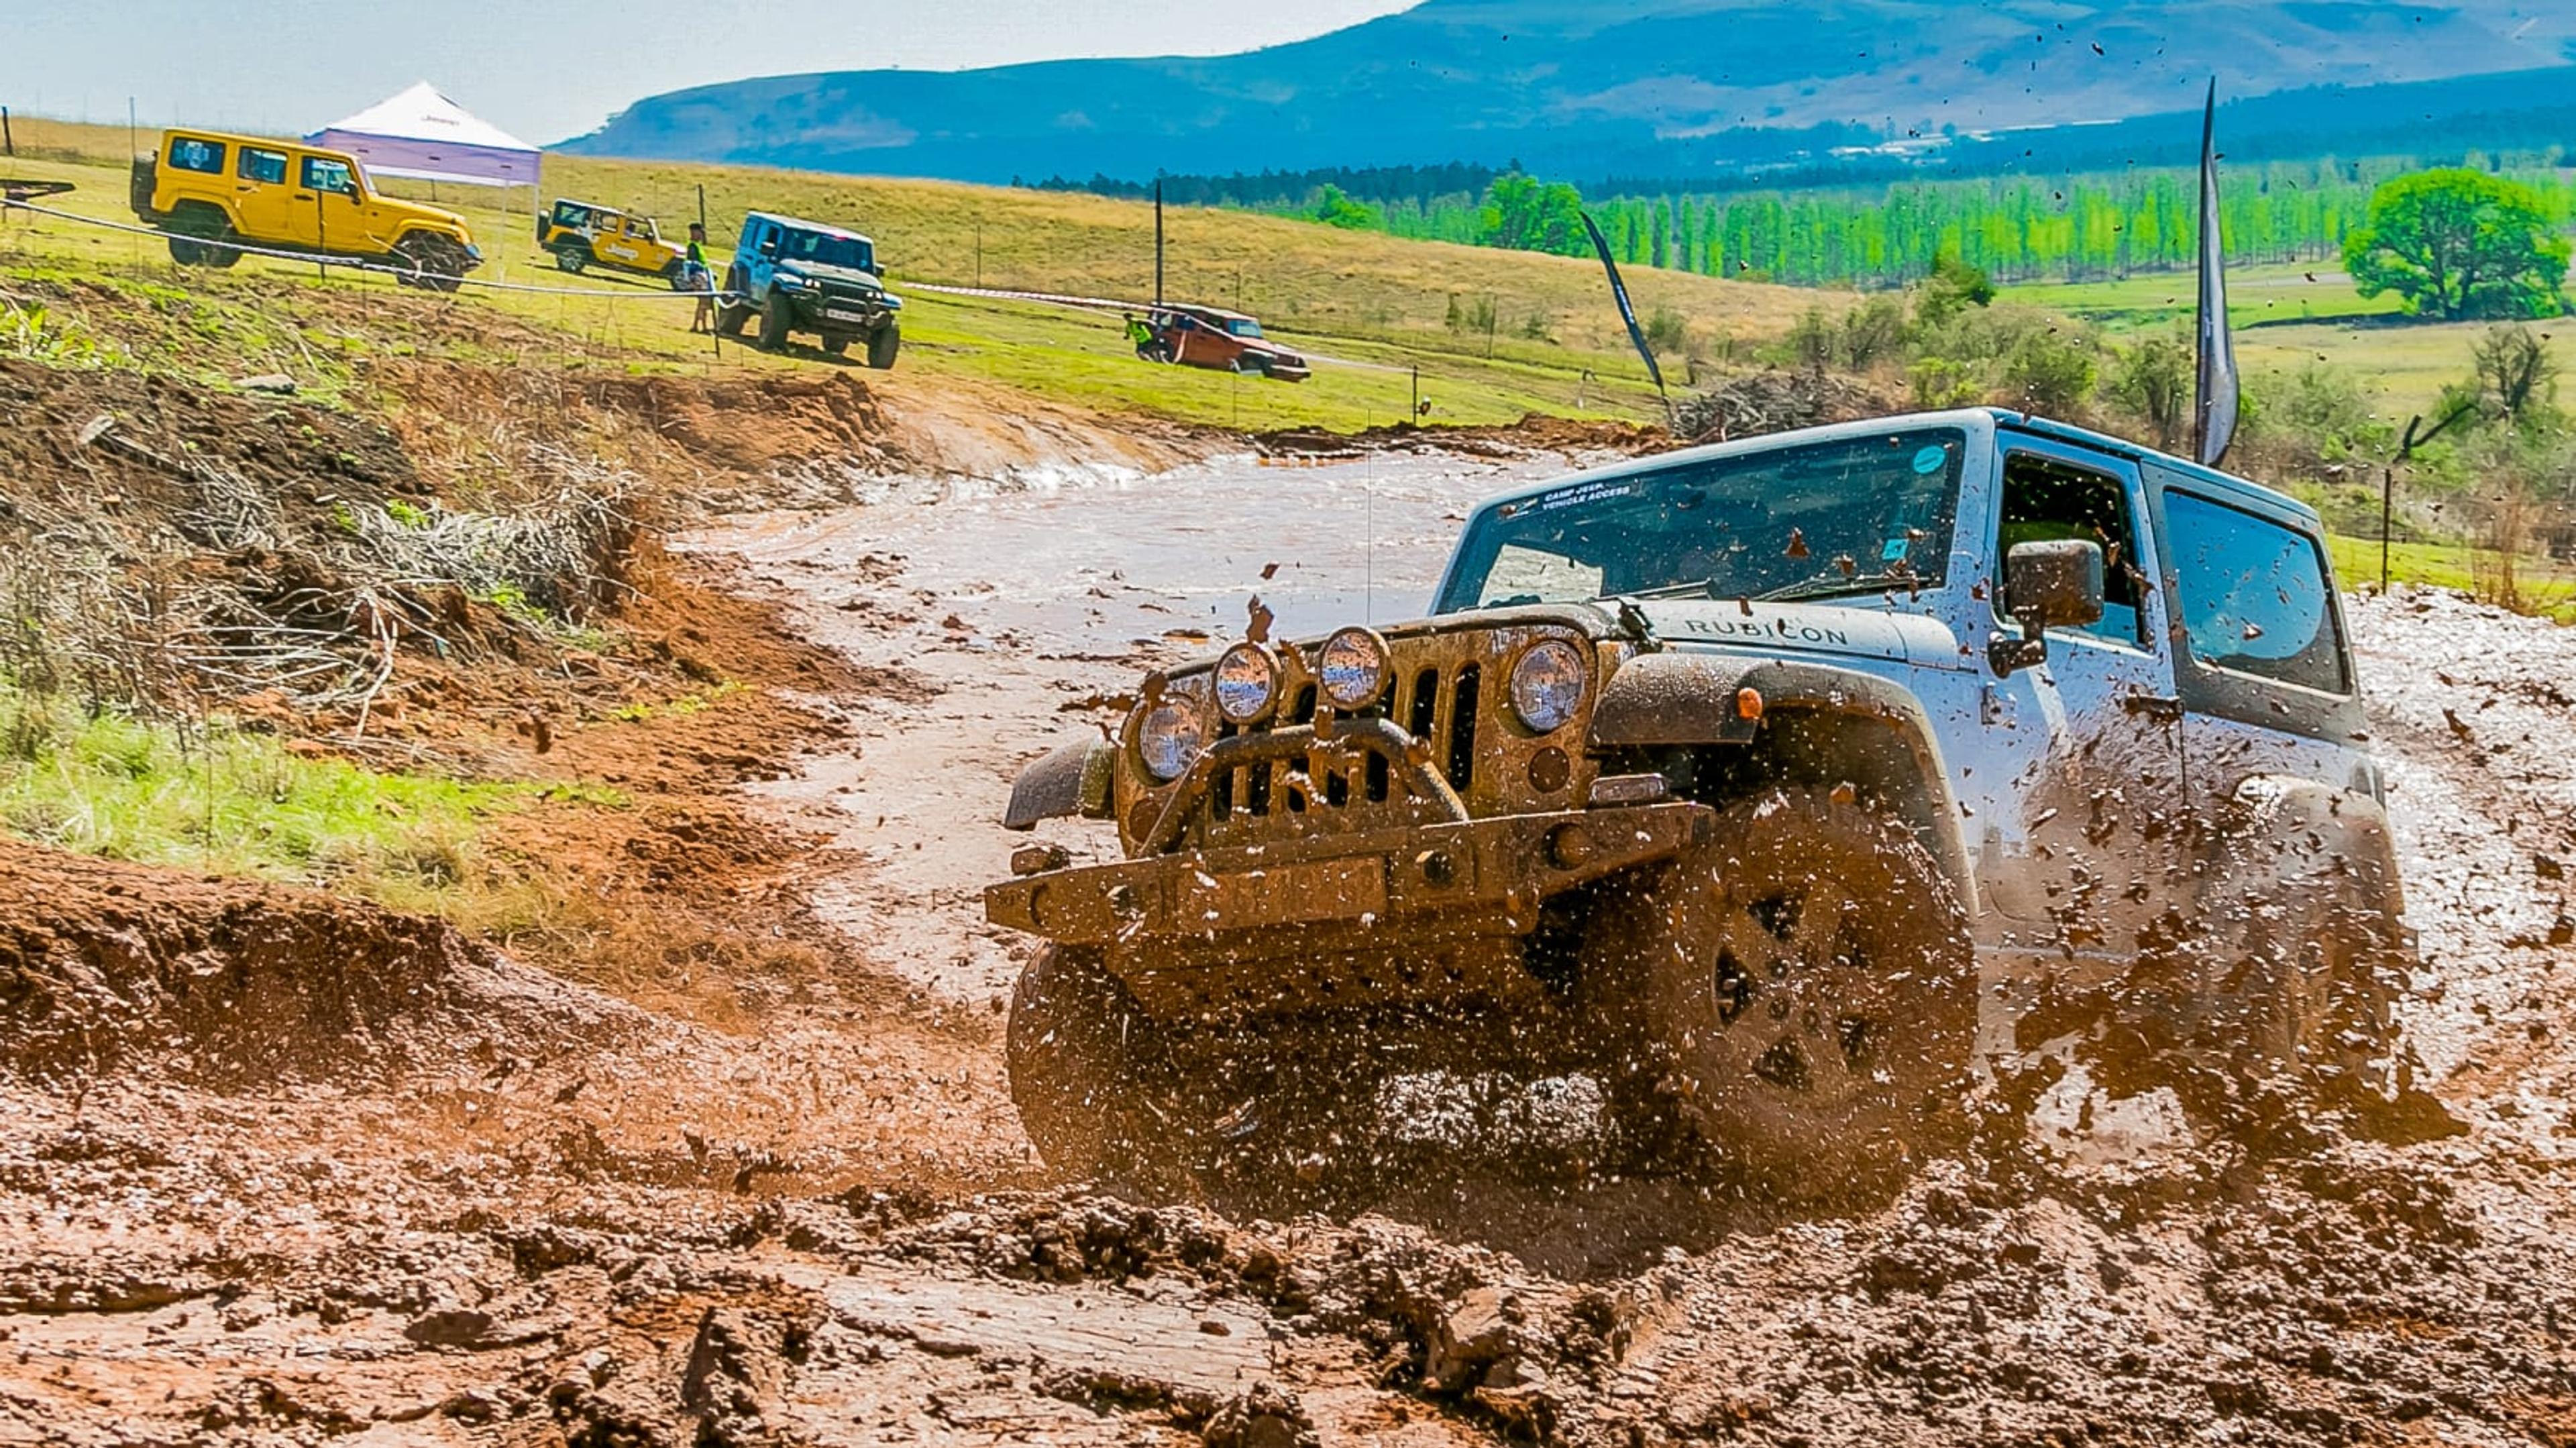 A Jeep Equipped with Mud Tires Splashing Through the Hillside